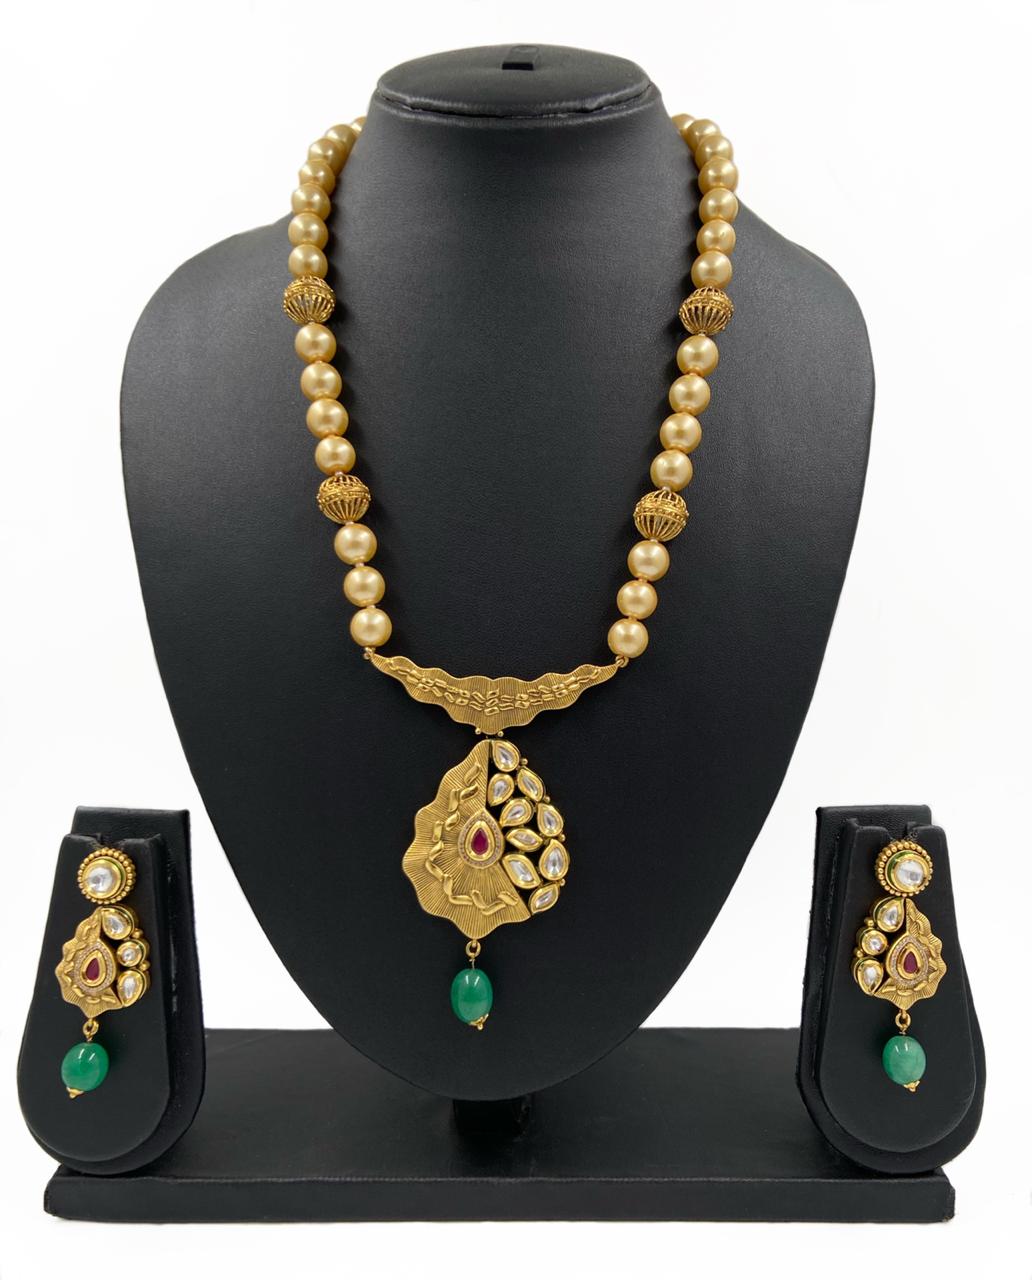 Designer Gold Plated Kundan Pendant With Pearls Necklace Set For Woman Antique Golden Necklace Sets